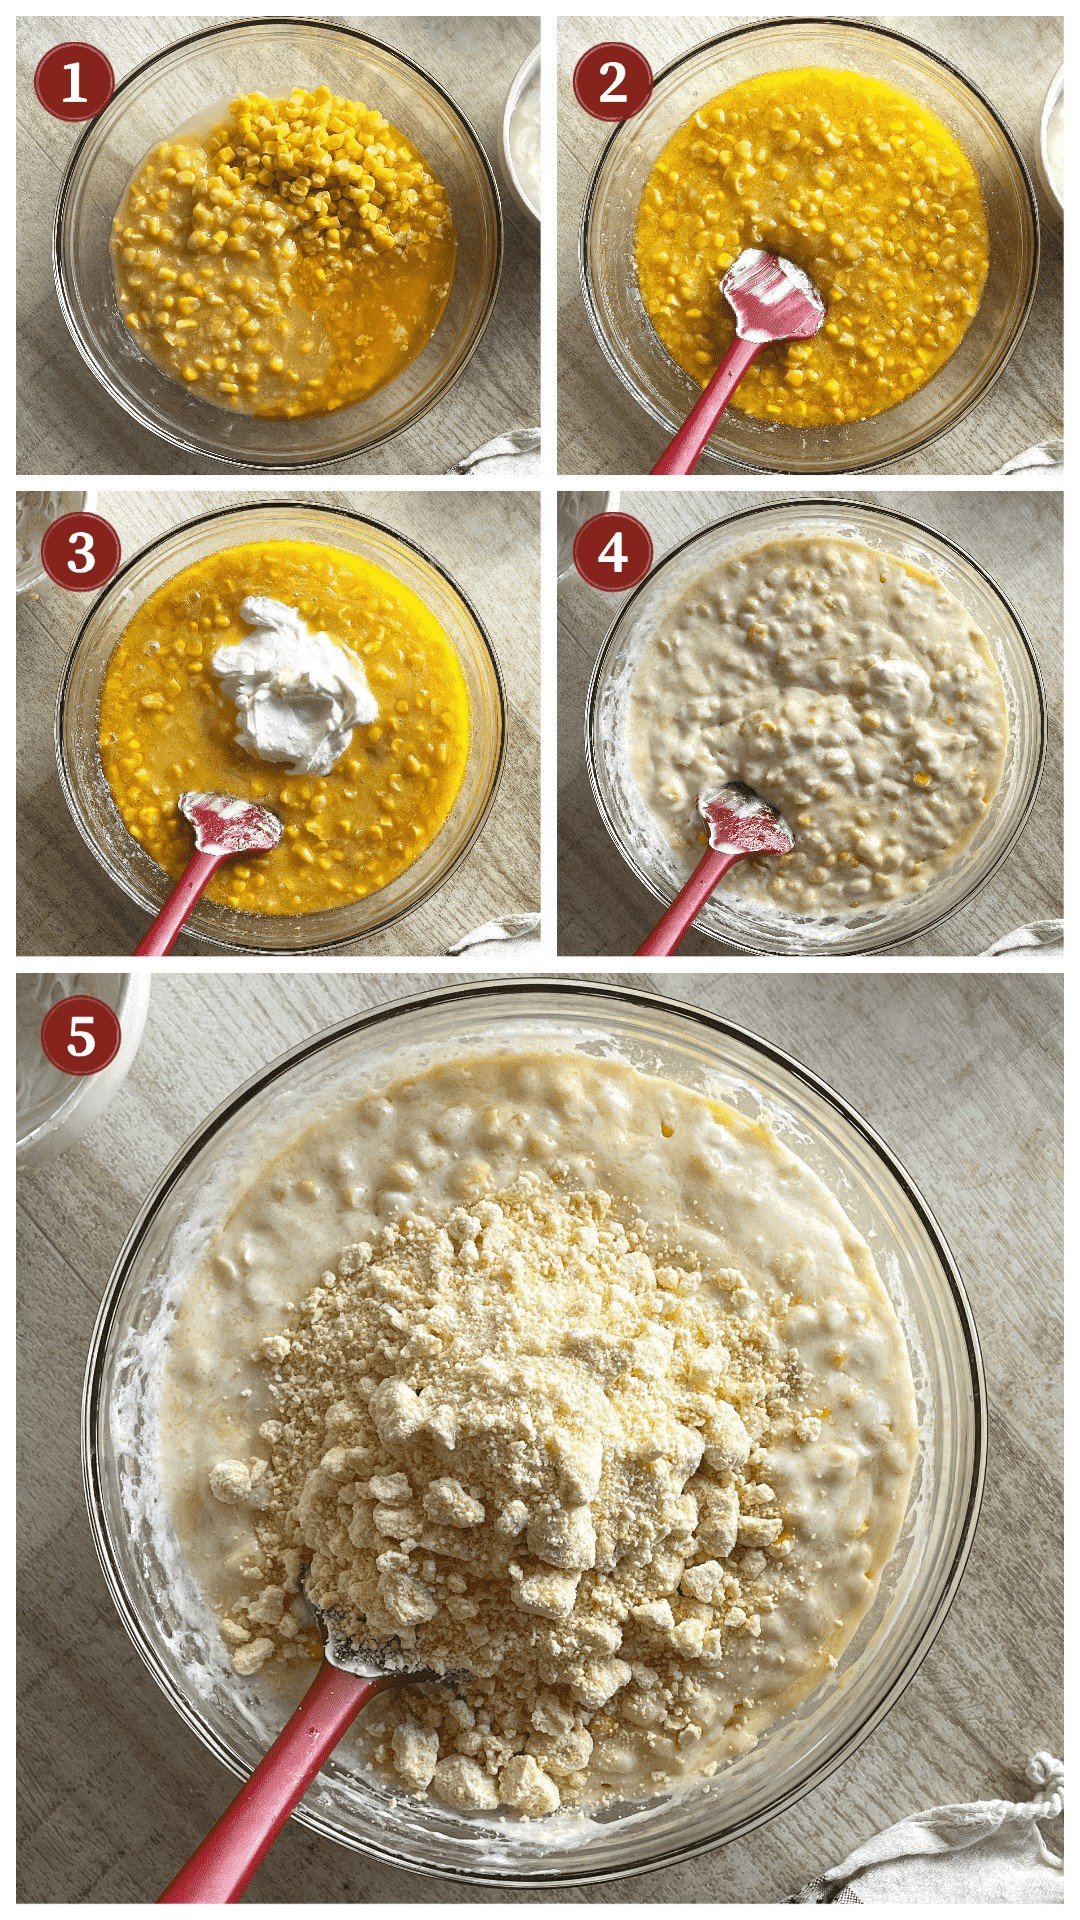 A collage of images showing how to make corn pudding, steps 1 - 5.